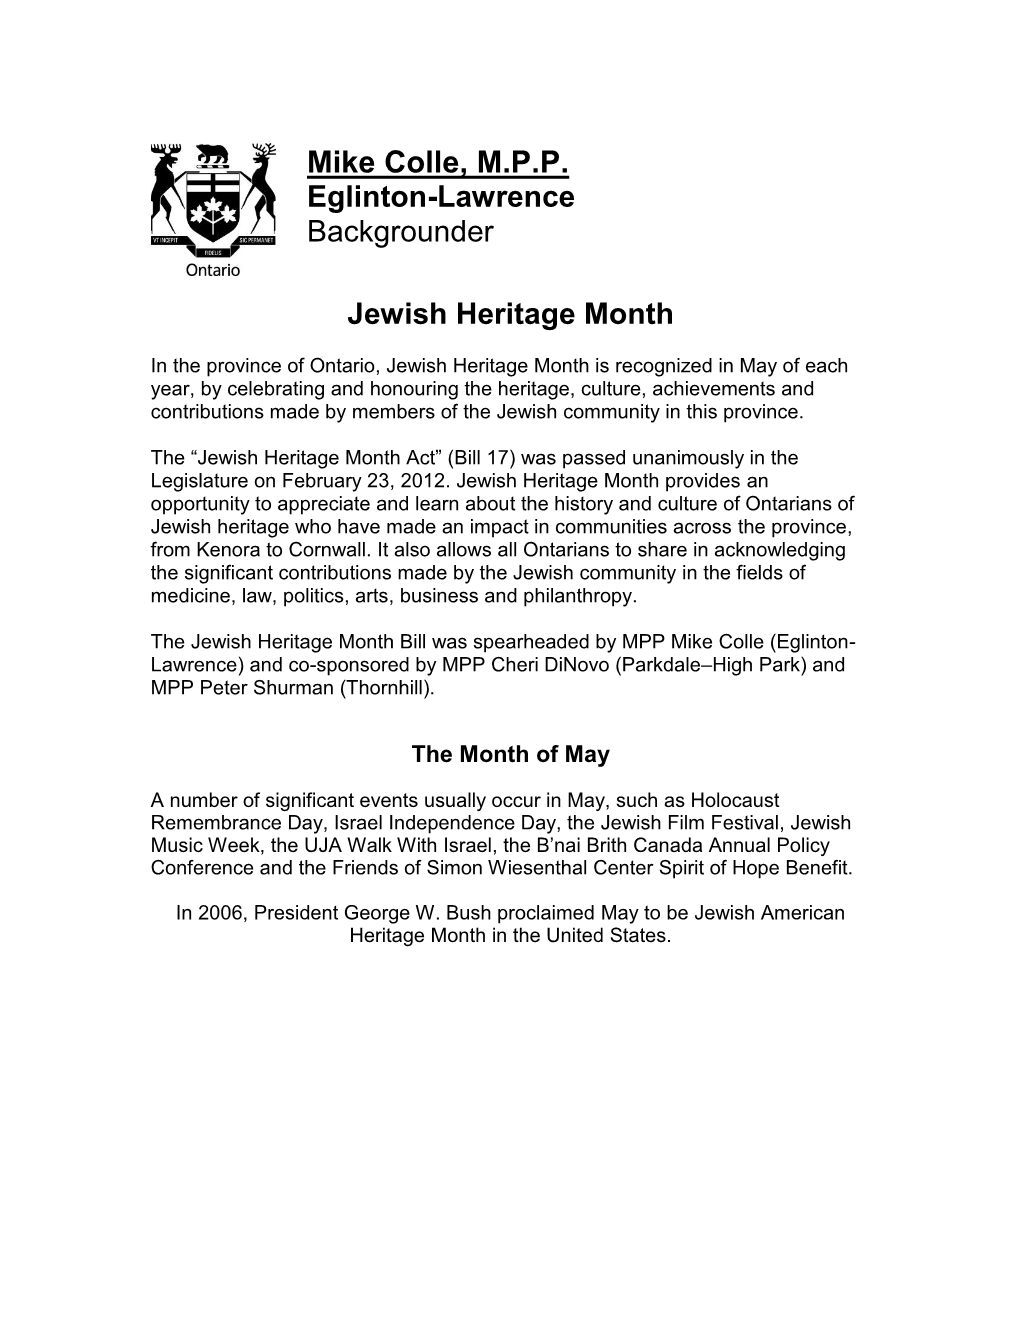 Mike Colle, M.P.P. Eglinton-Lawrence Backgrounder Jewish Heritage Month